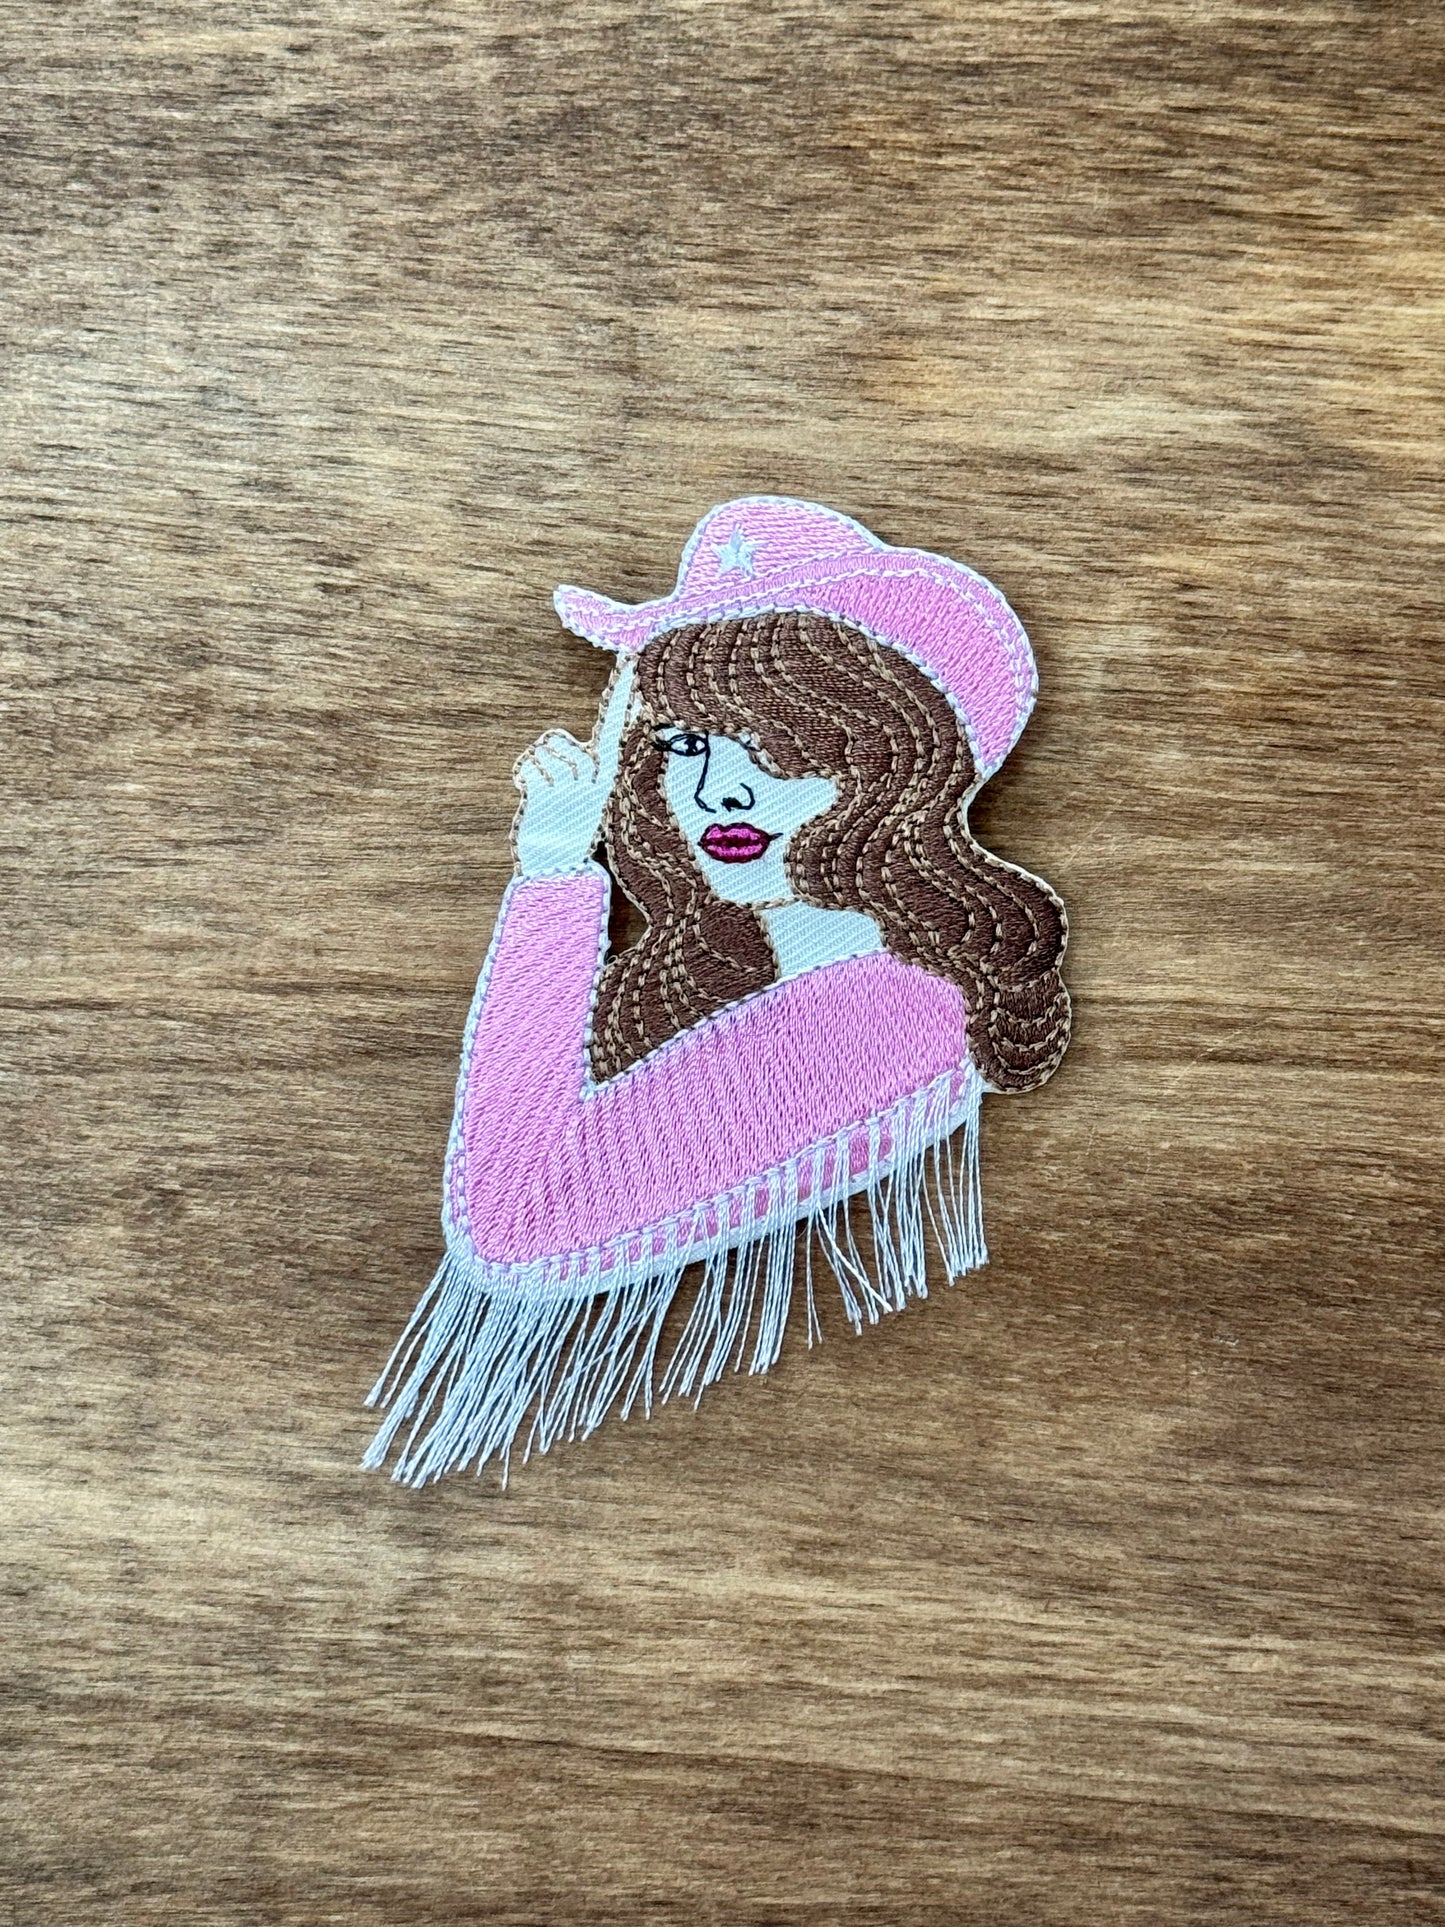 Fringed Cowgirl Patch